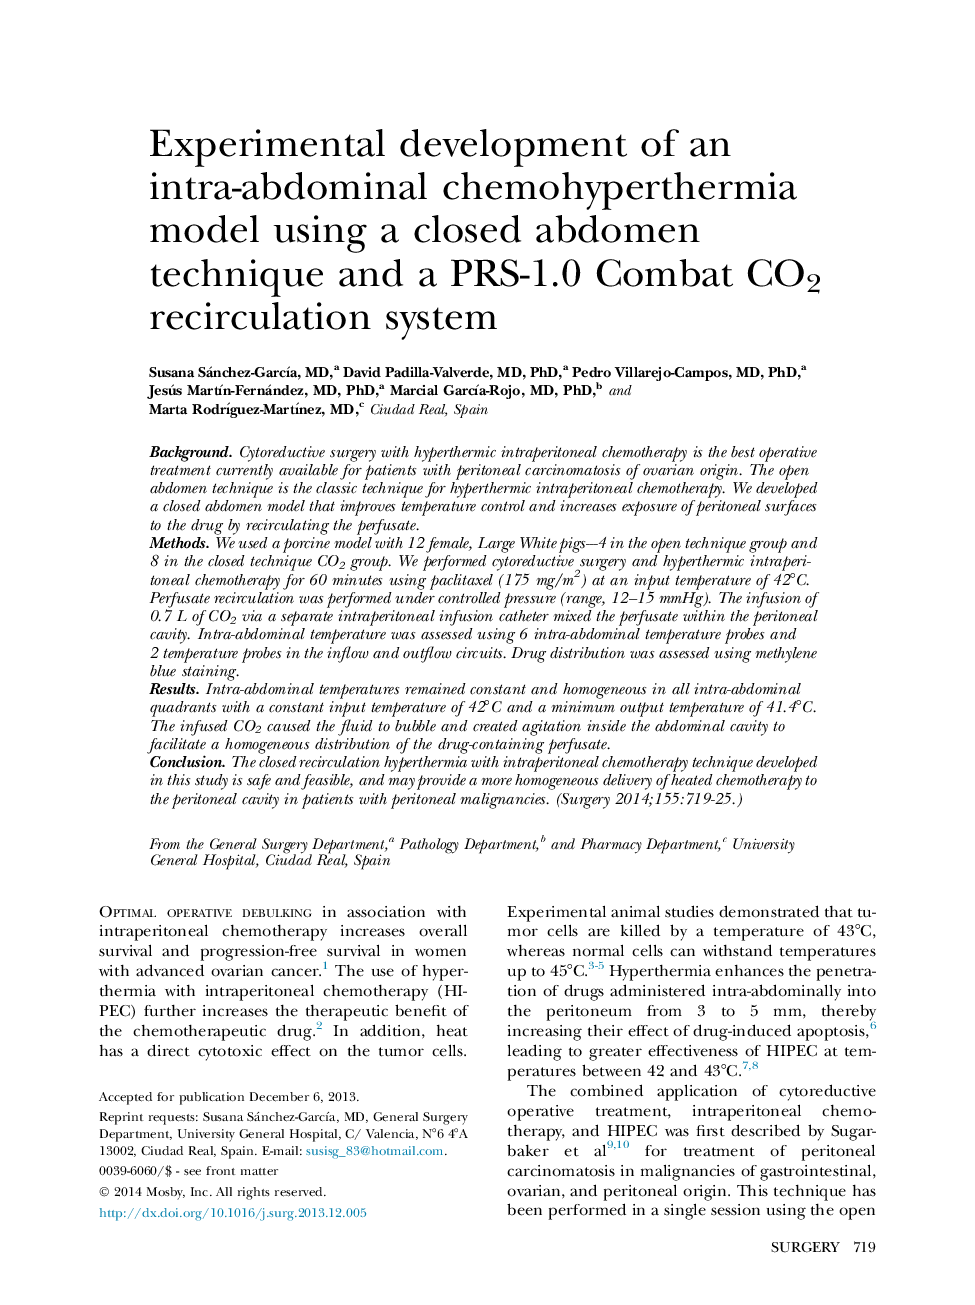 Experimental development of an intra-abdominal chemohyperthermia model using a closed abdomen technique and a PRS-1.0 Combat CO2 recirculation system